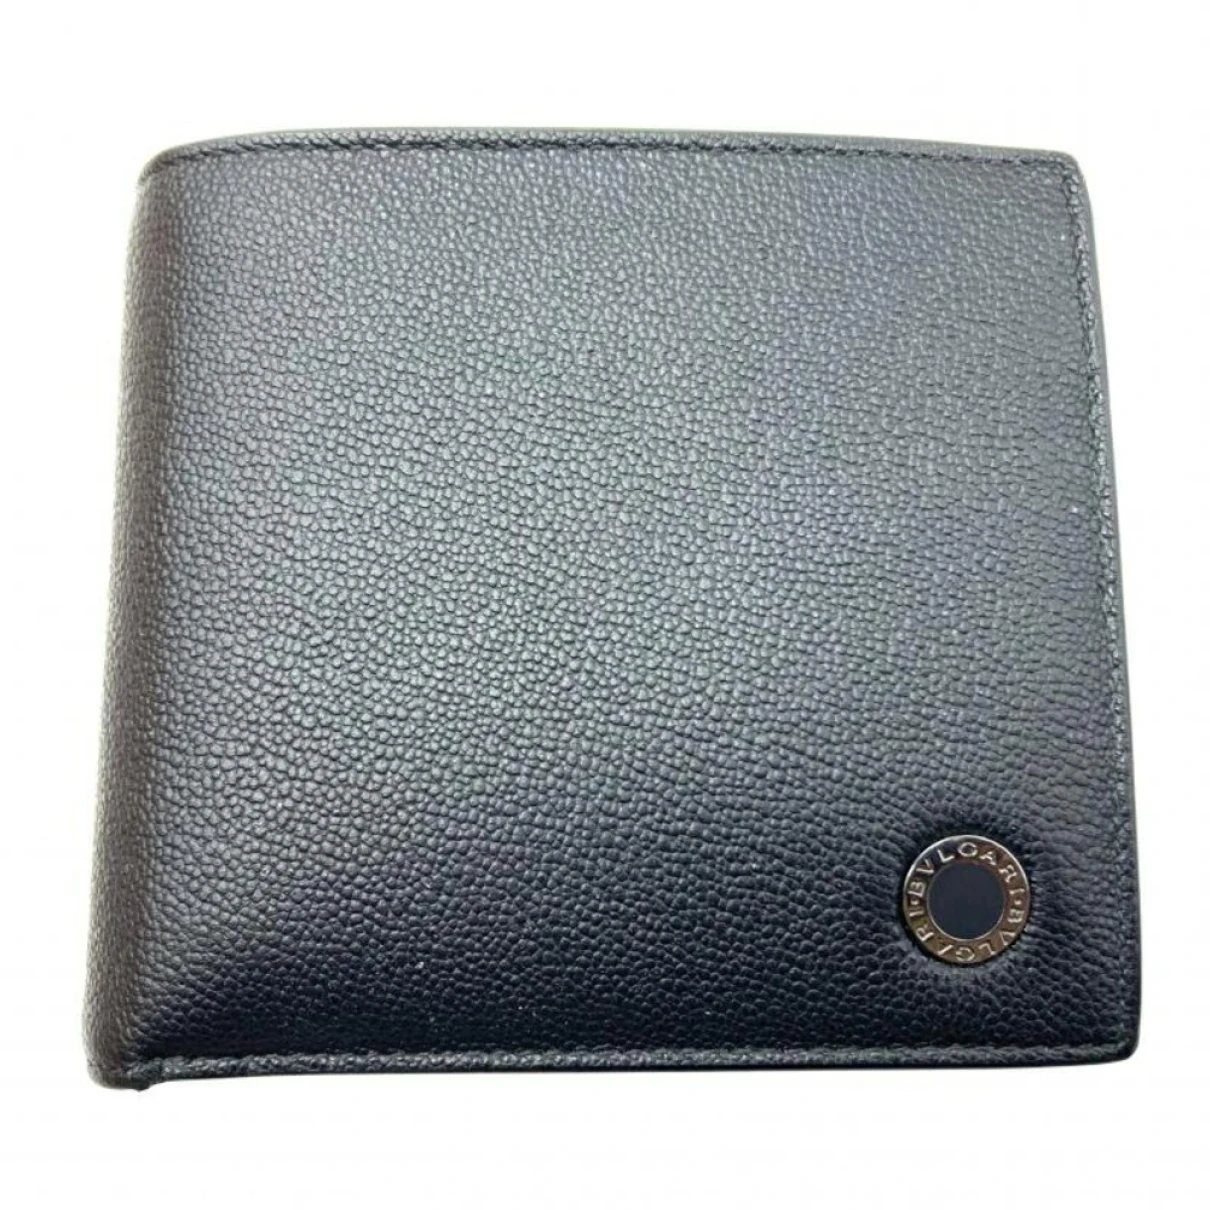 Pre-owned Bvlgari Leather Small Bag In Black